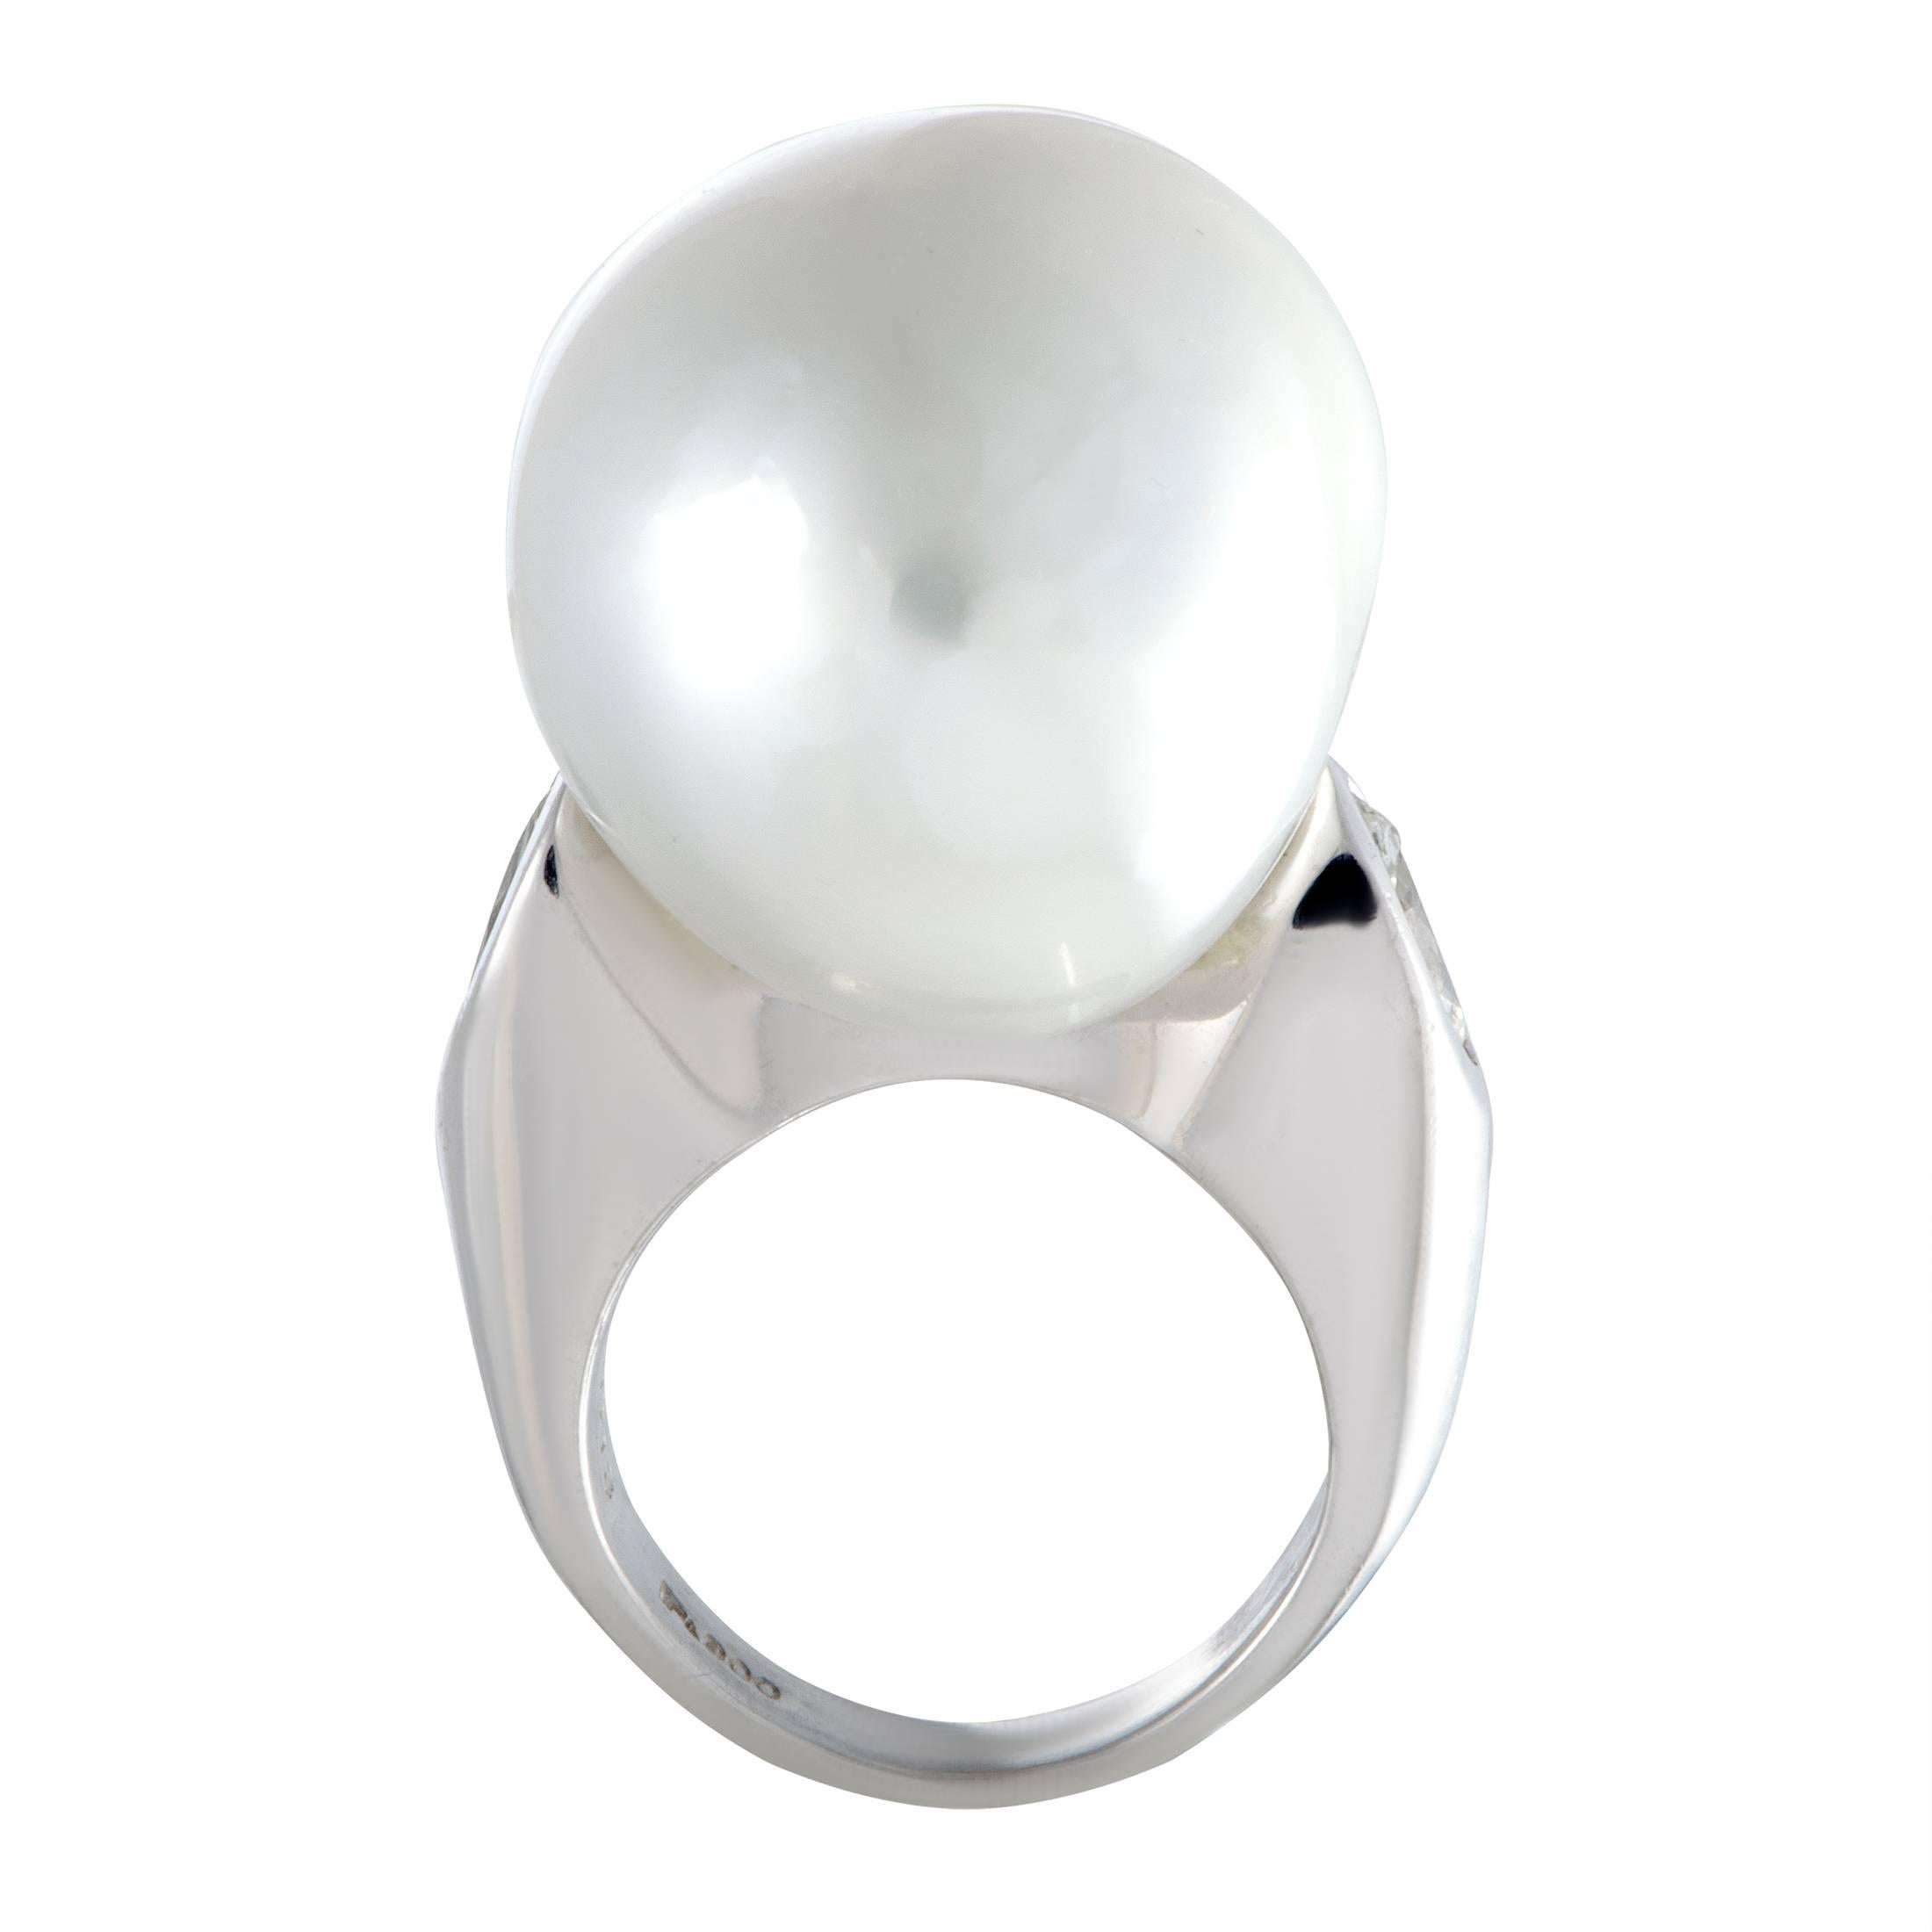 The star of the show in this sublime ring is the gorgeously shaped white pearl, whose endearing beauty is harmoniously complemented by the prestigiously gleaming platinum and luxuriously glistening diamonds. The ring weighs 23.1 grams, and the